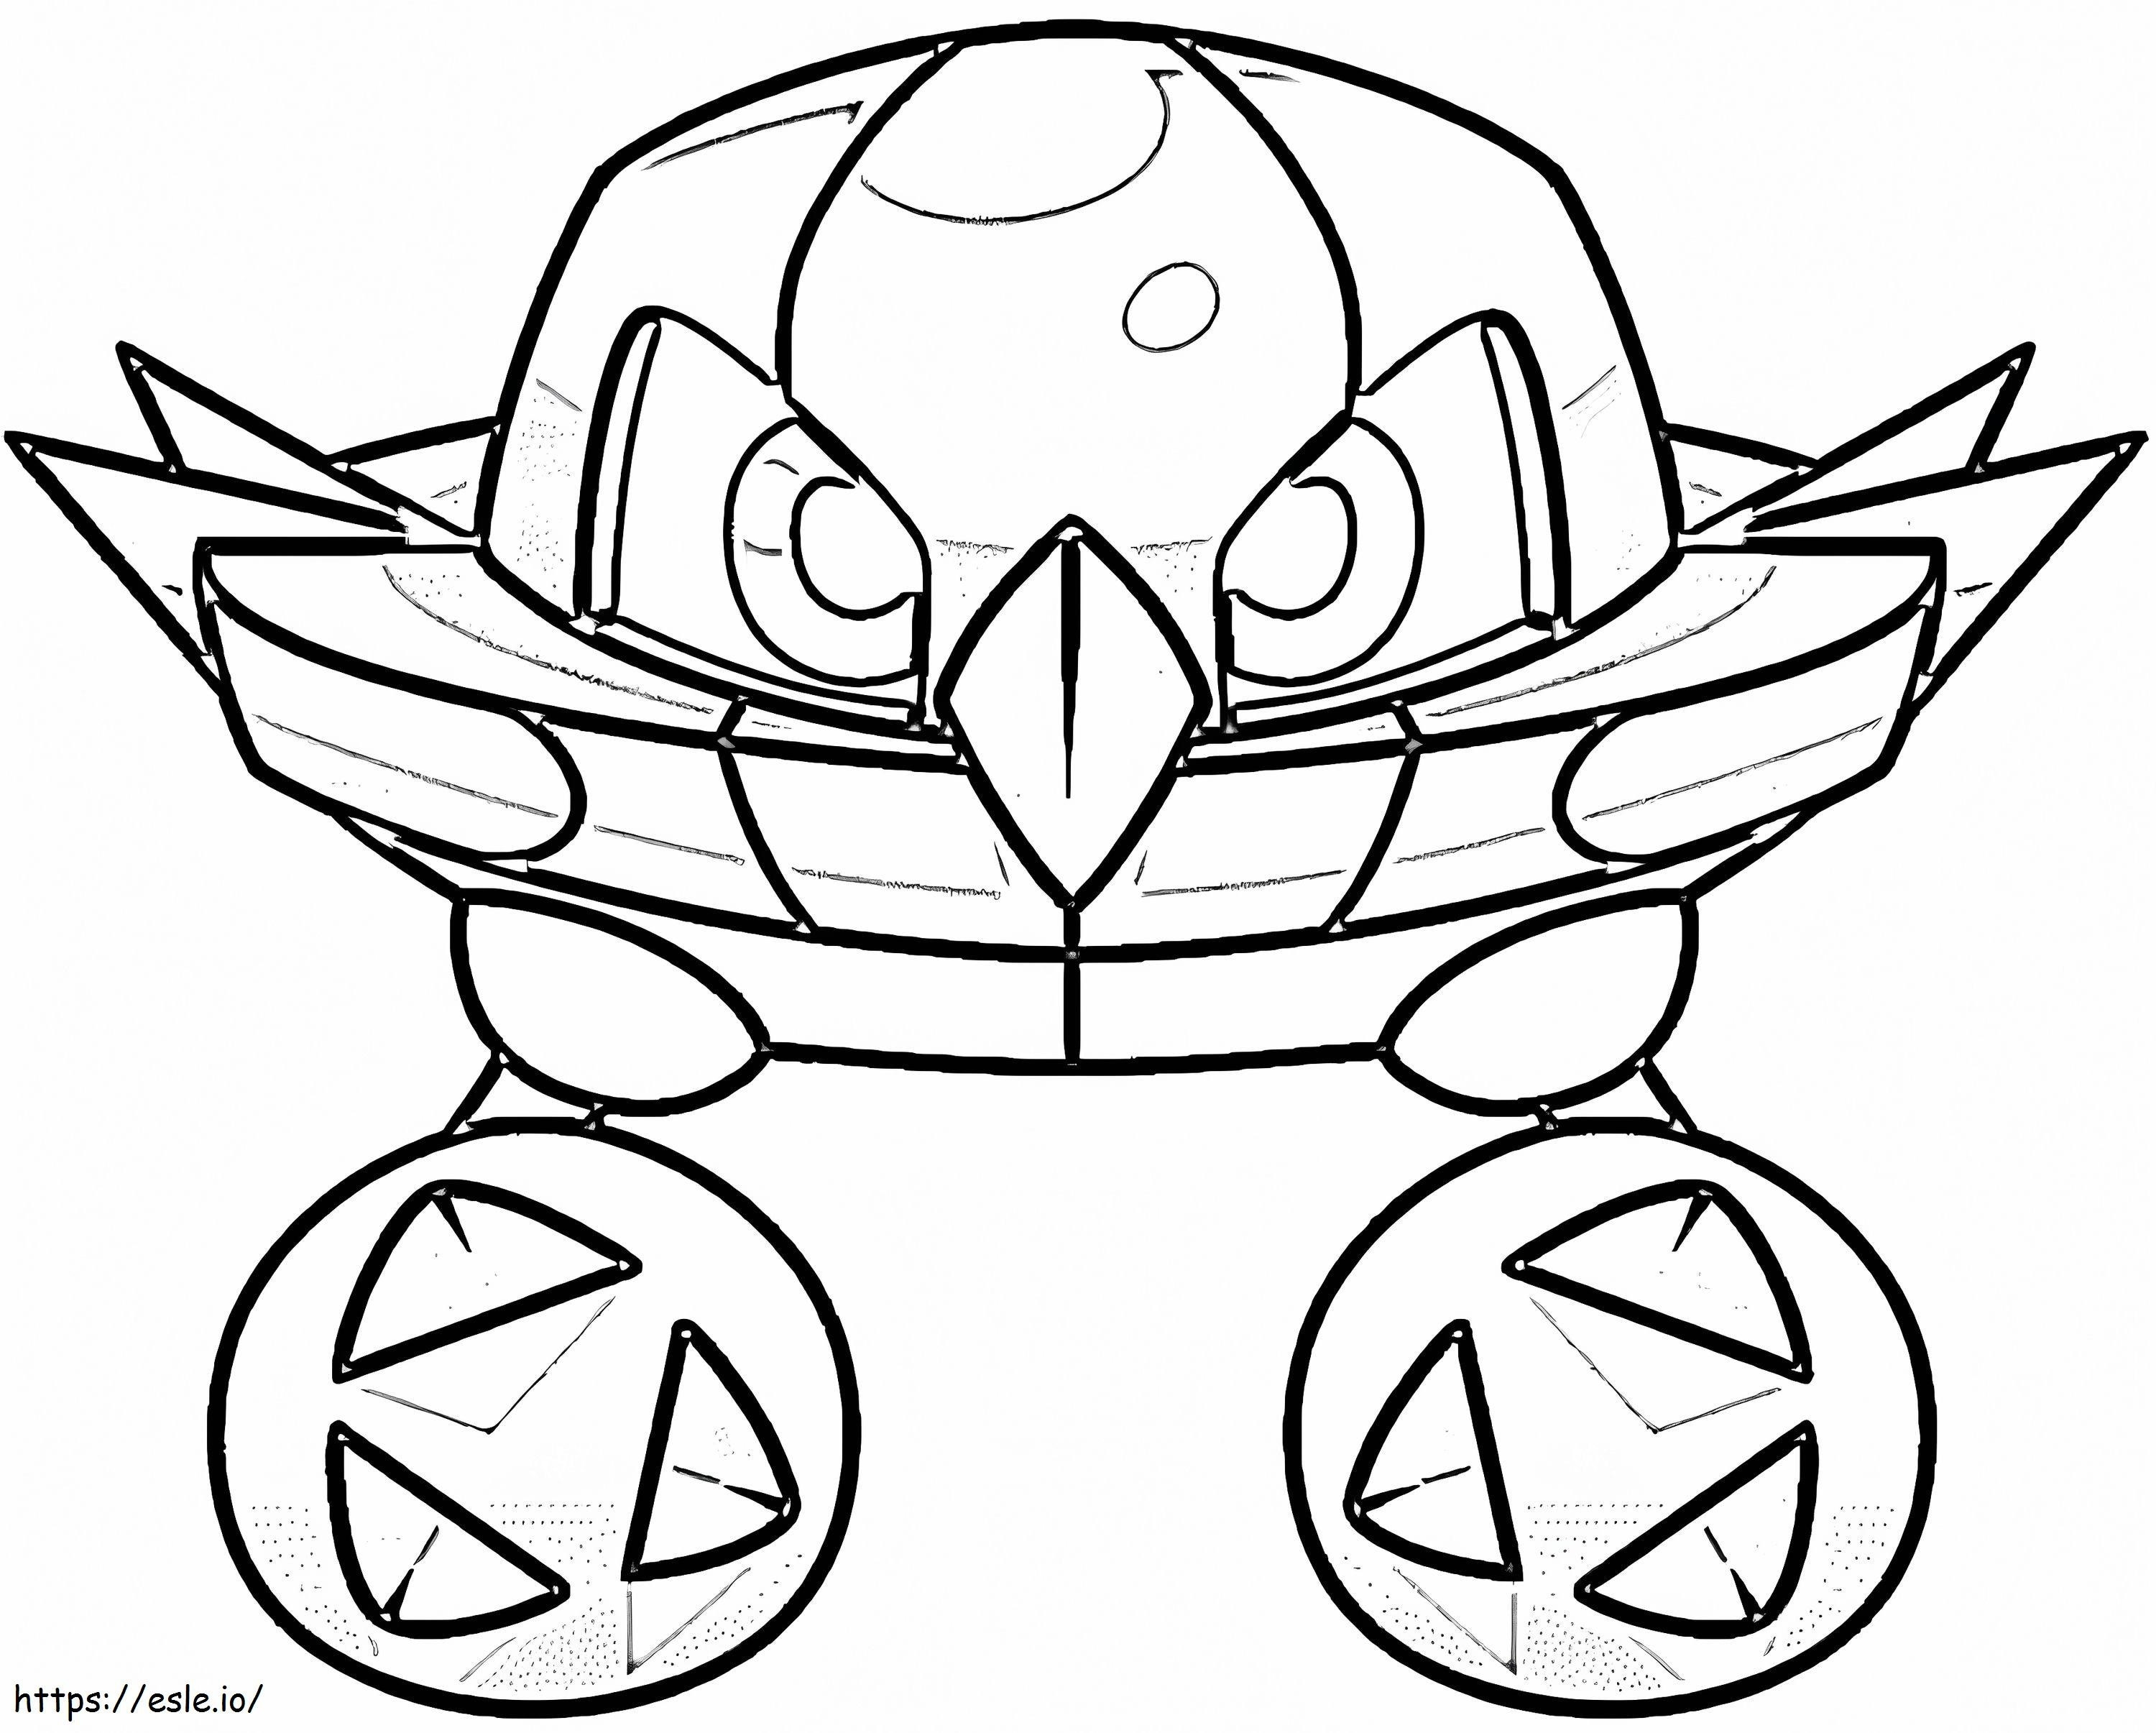 Methane 1 coloring page